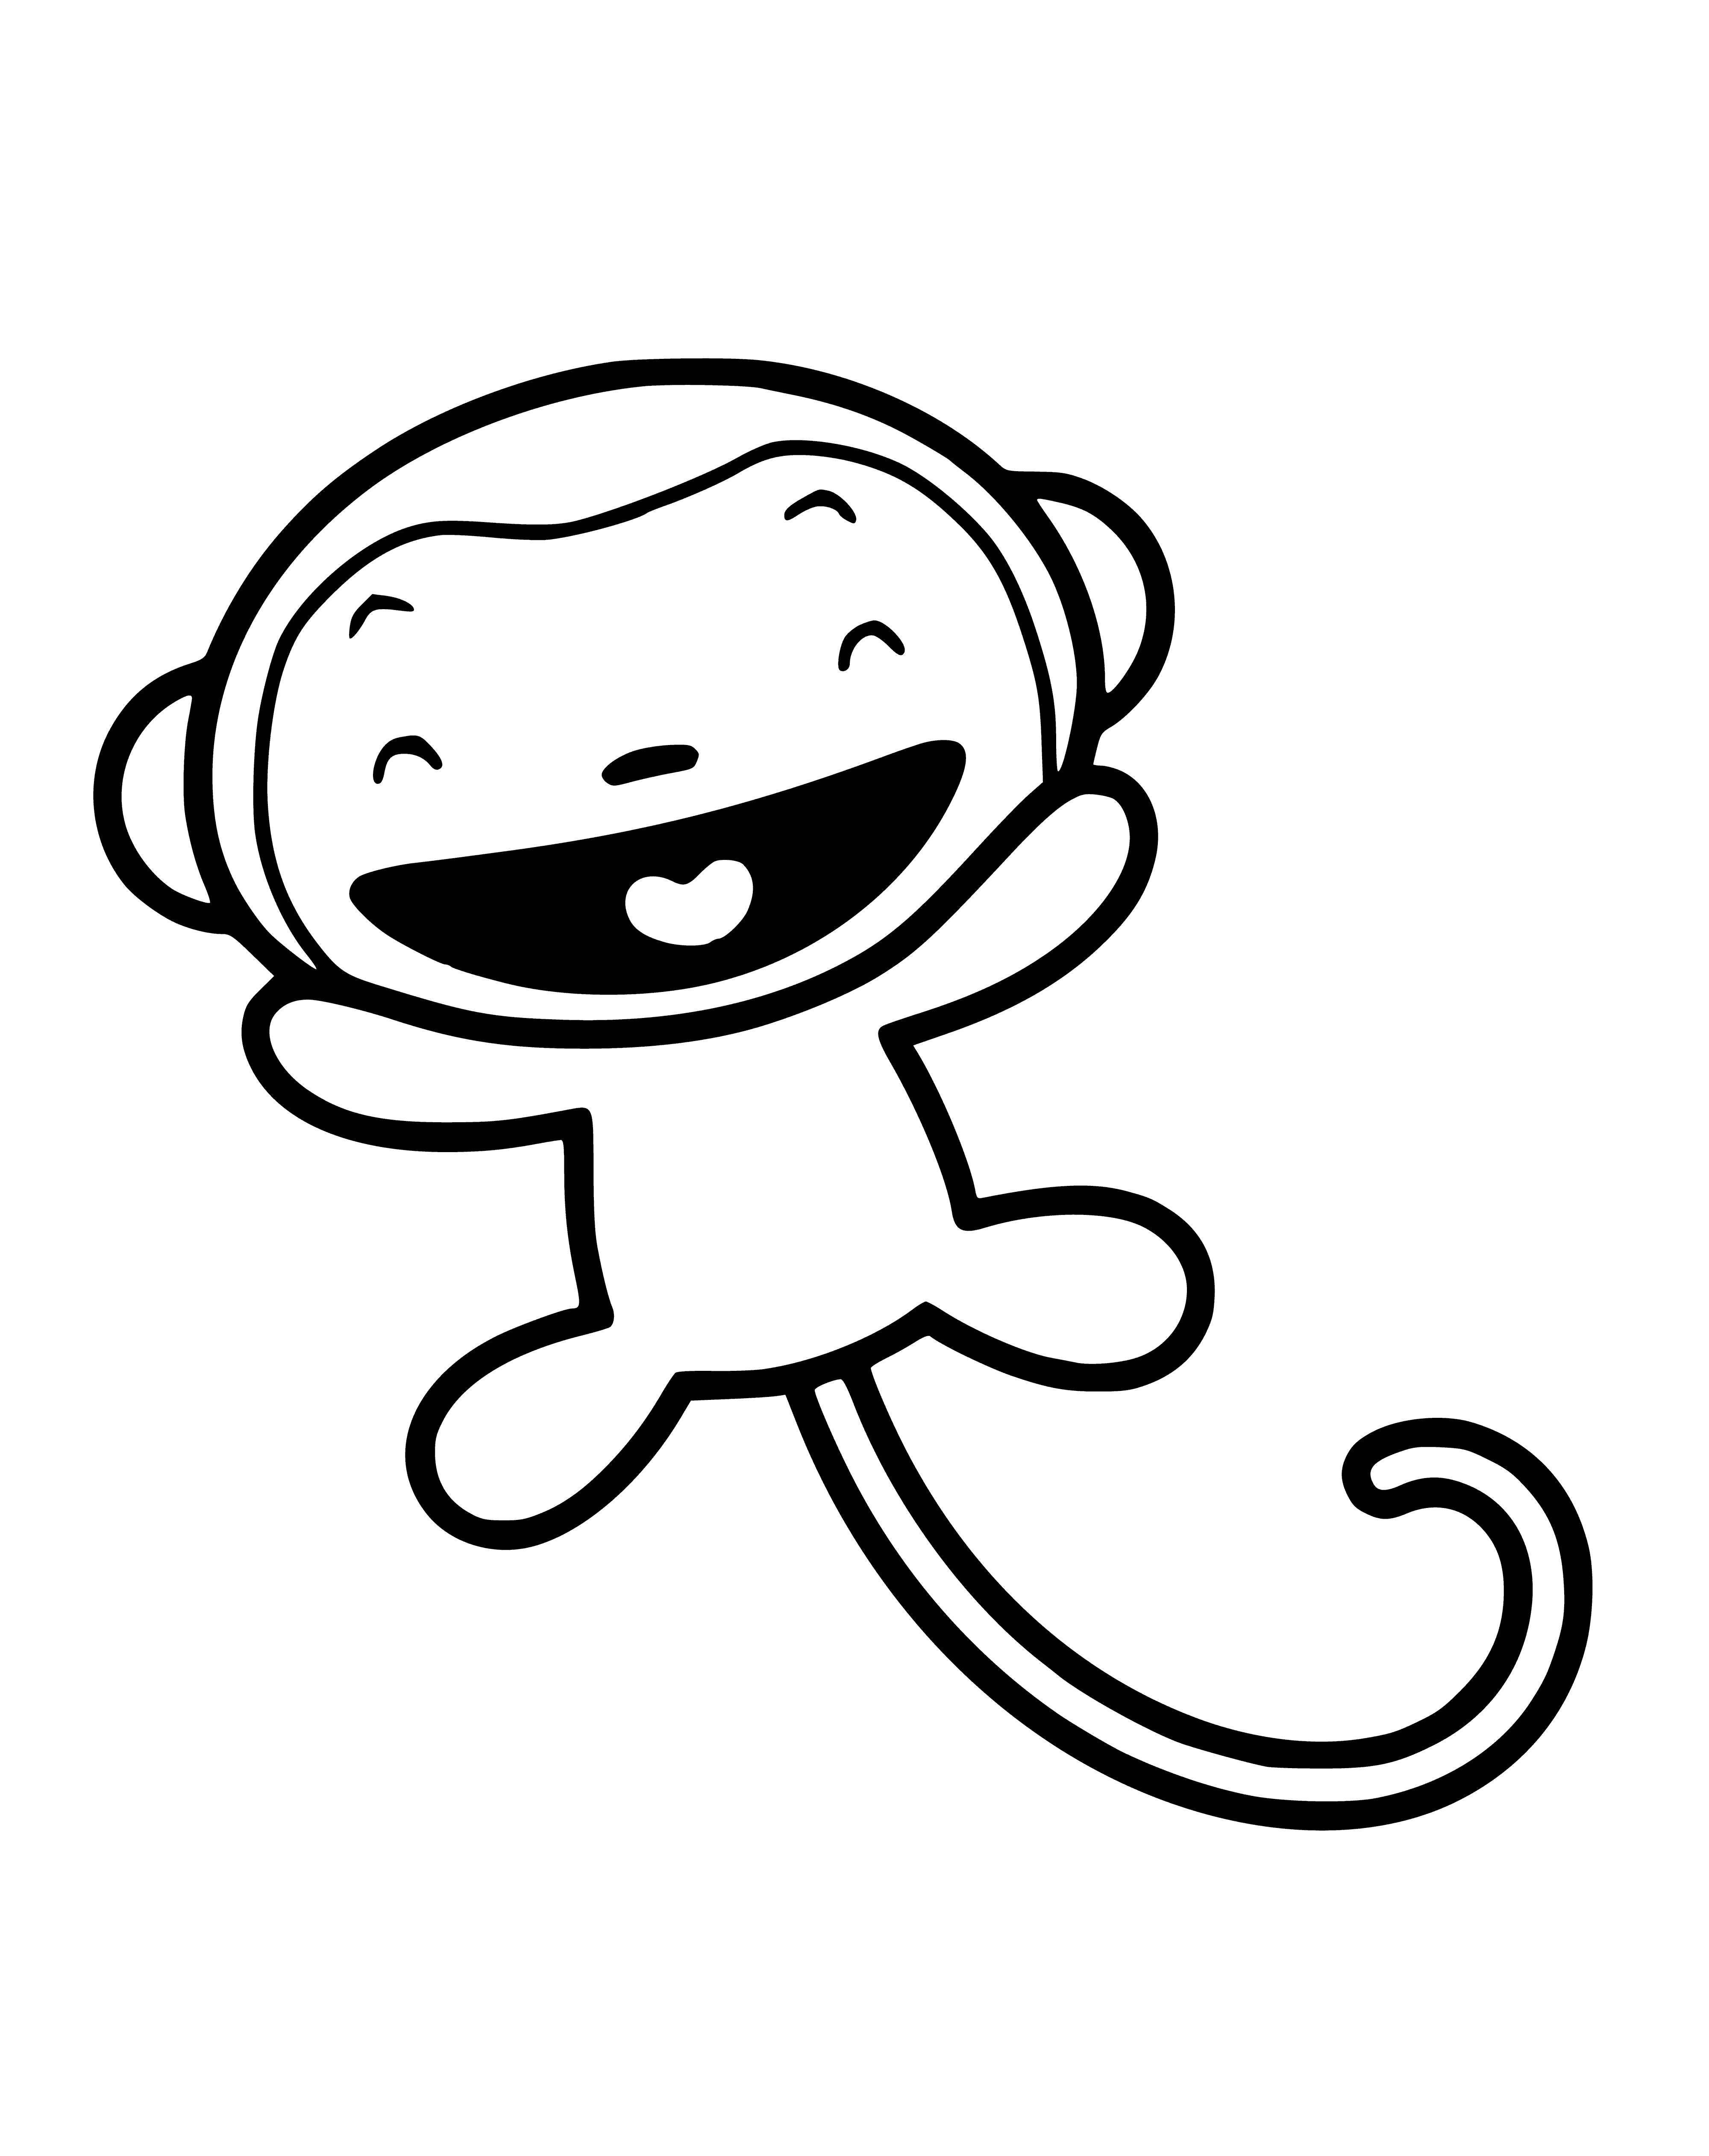 Monkey laughs coloring page